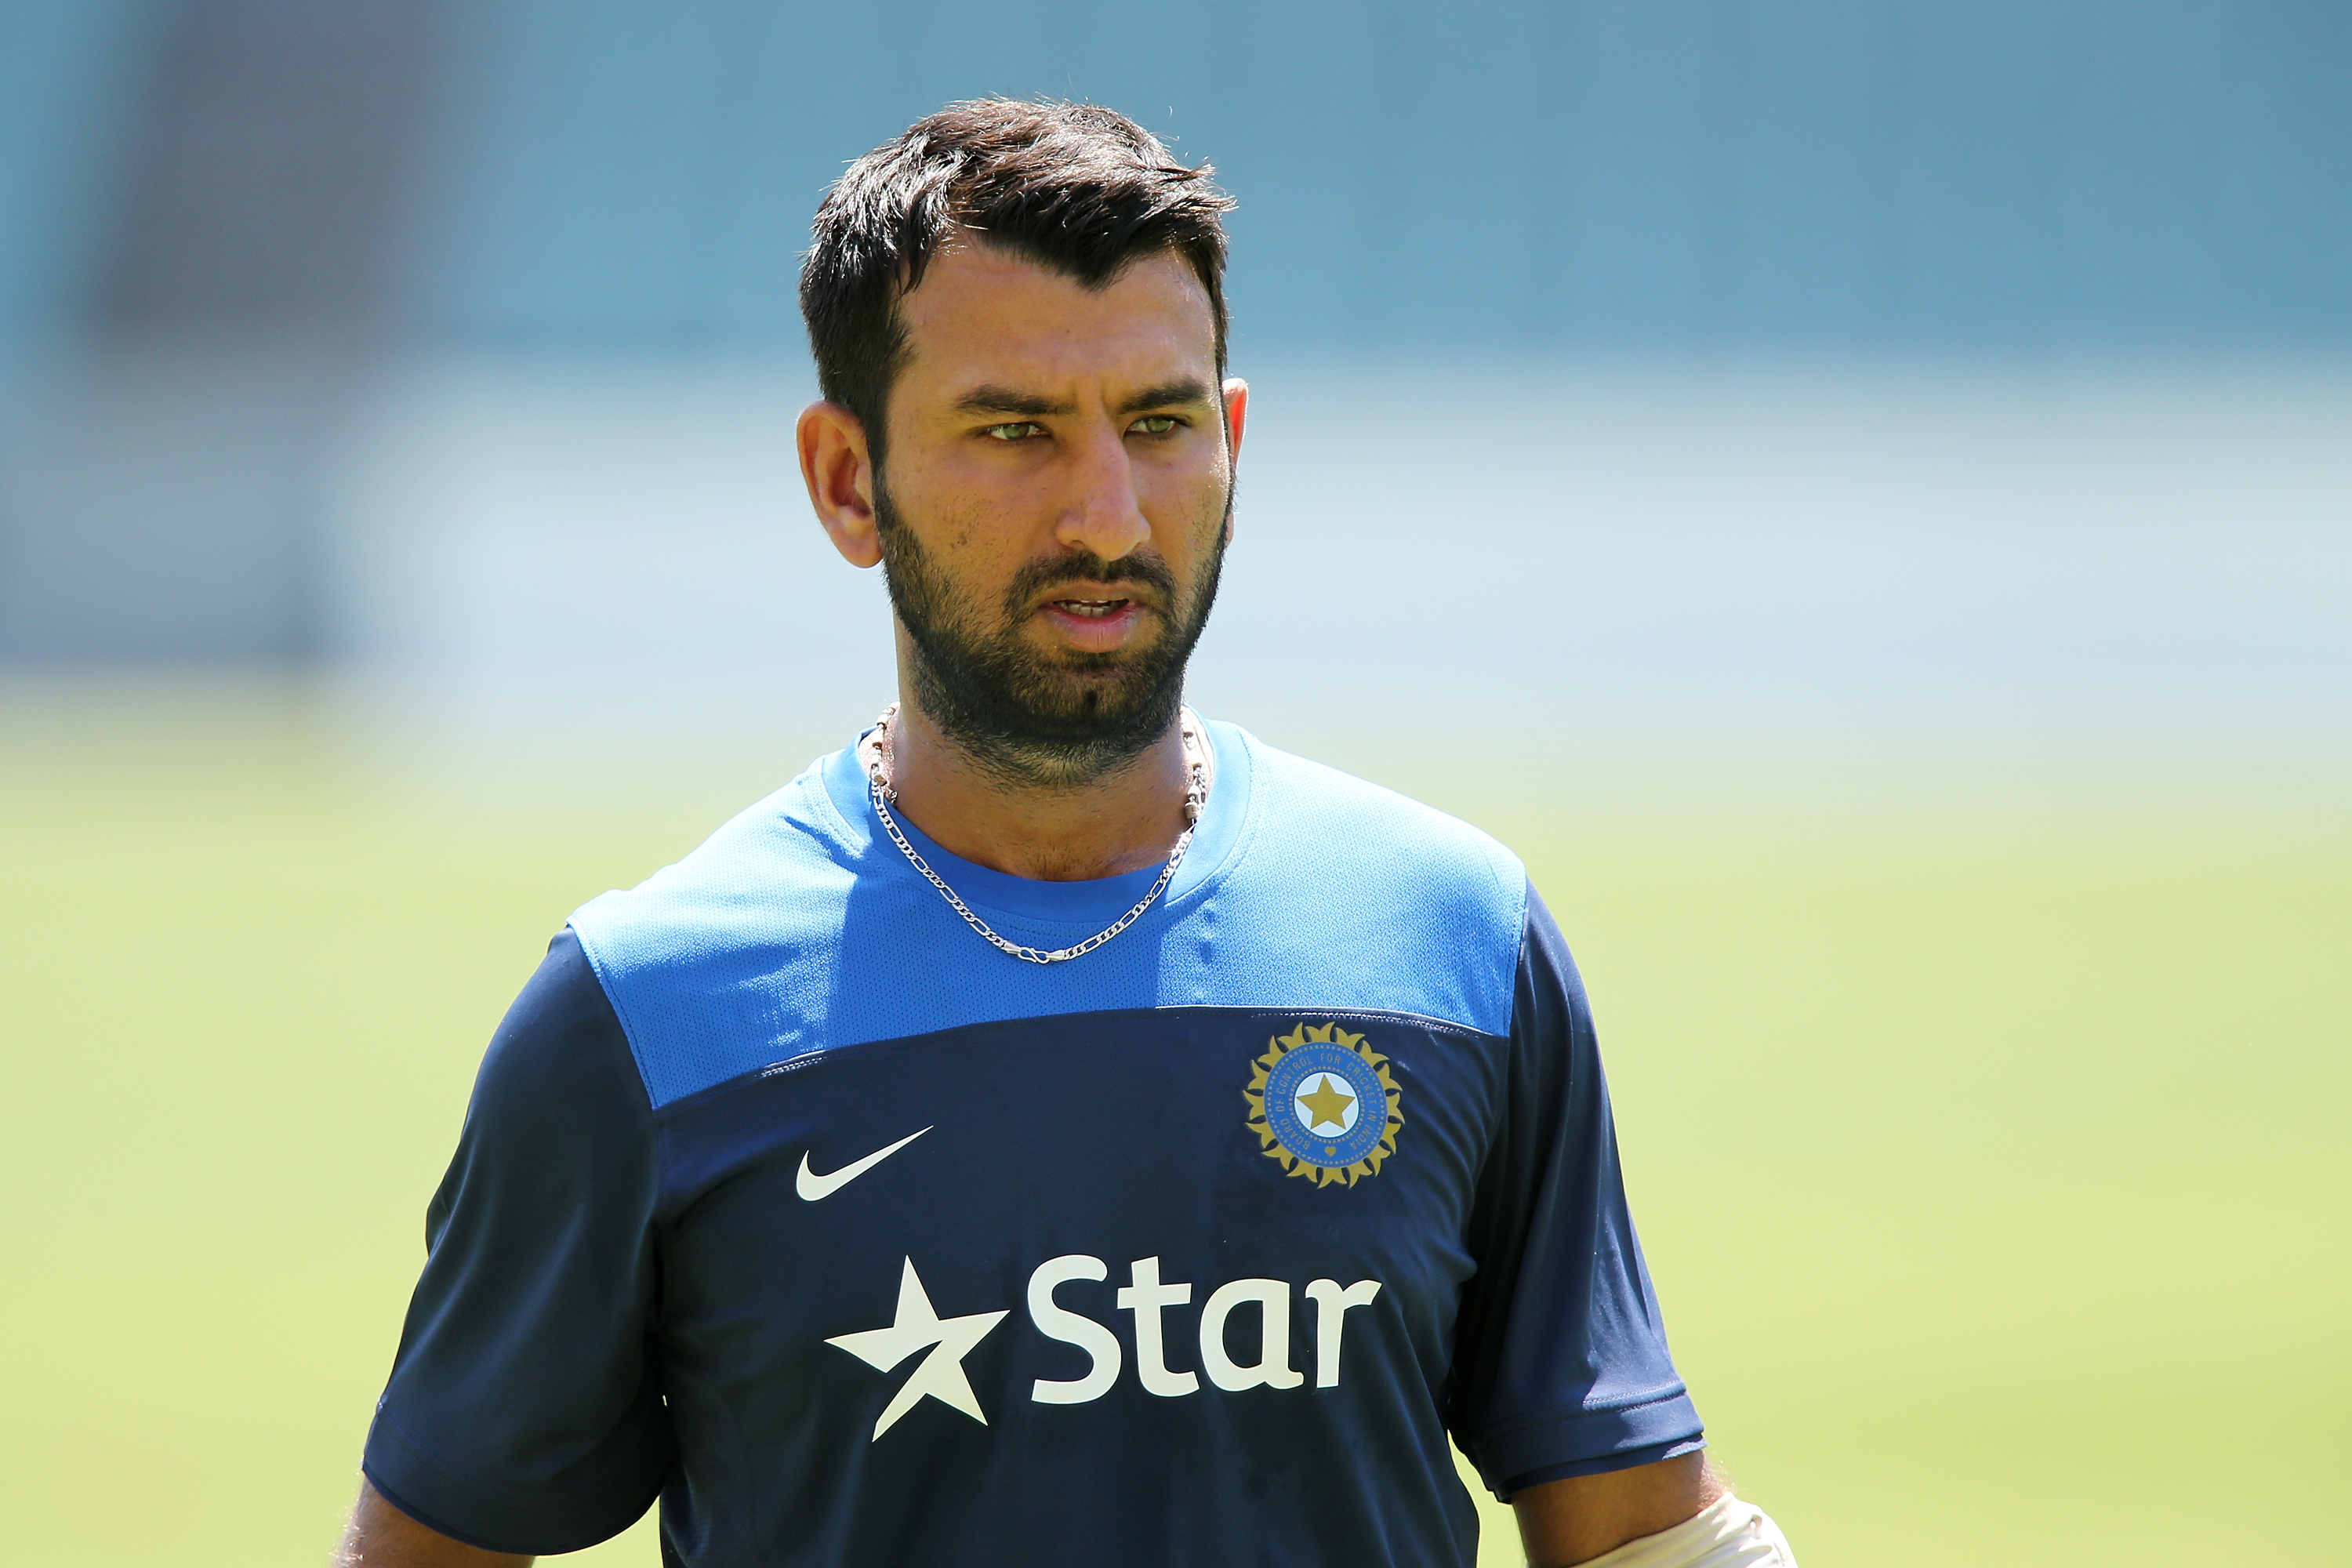 Difficult to pick the seam on the pink ball, says Cheteshwar Pujara